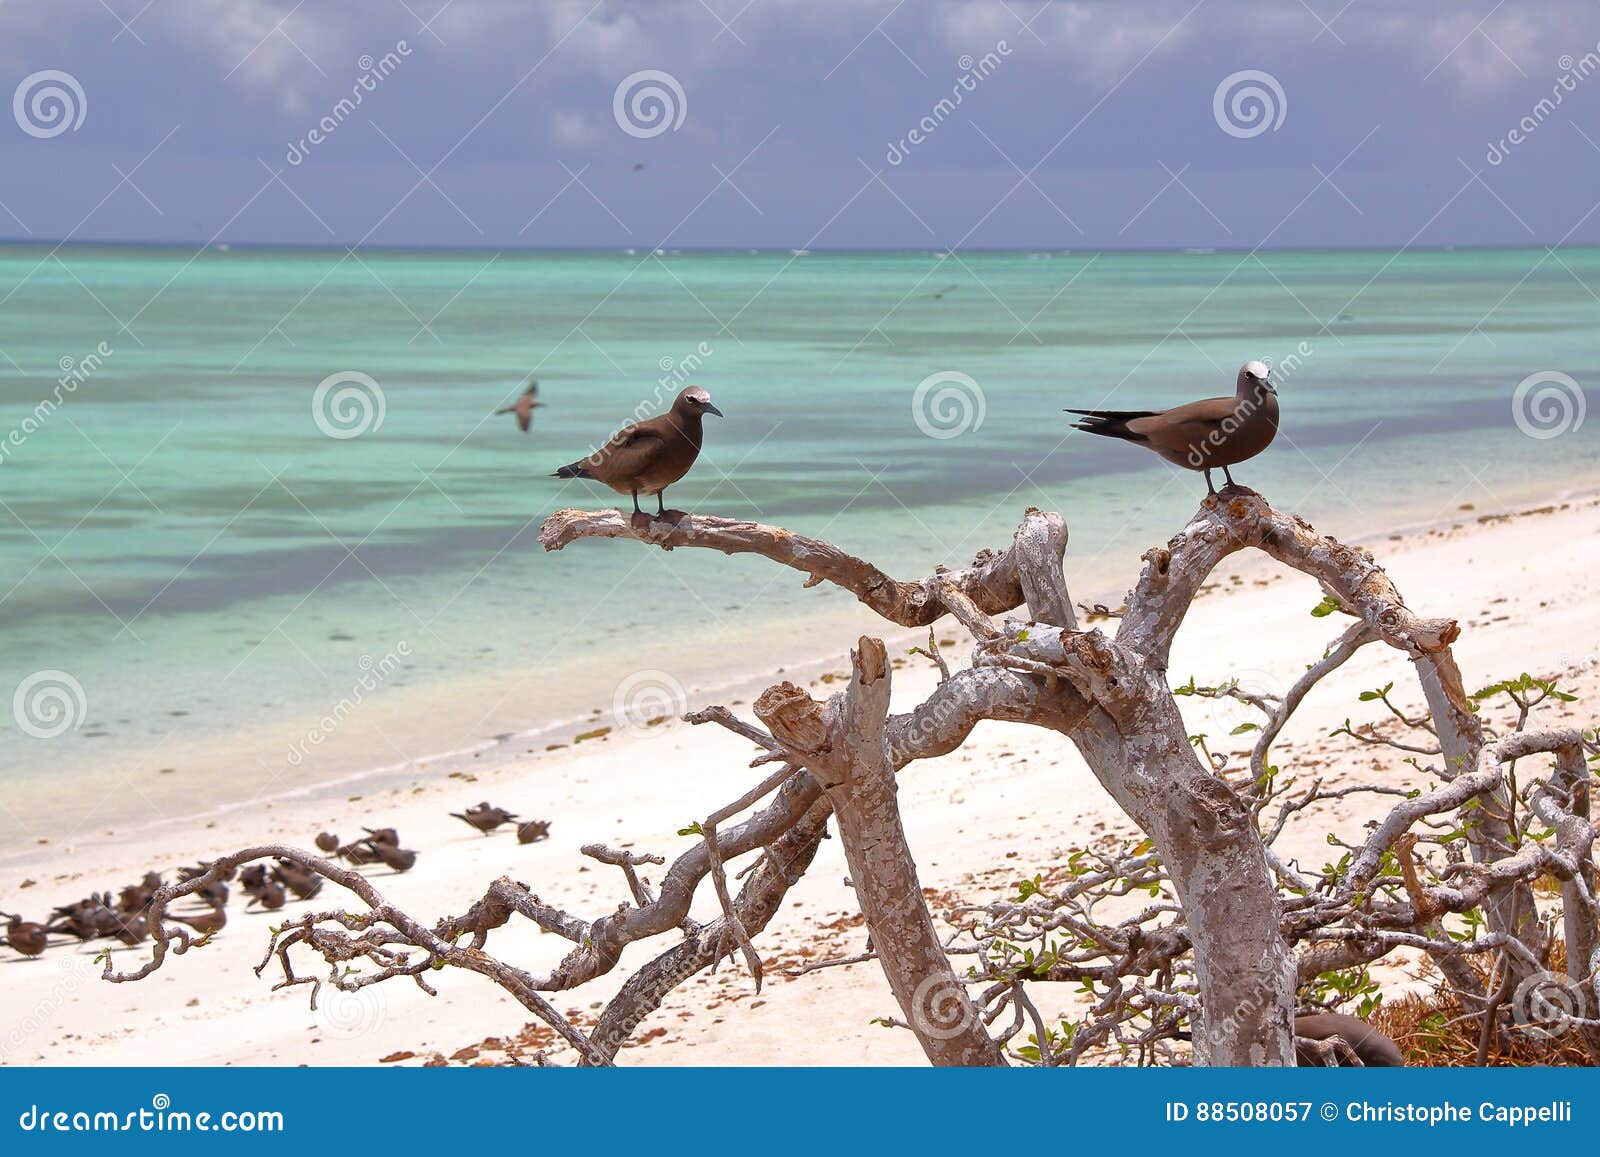 rodrigues island, mauritius: brown noddy anous stolidus at cocos island